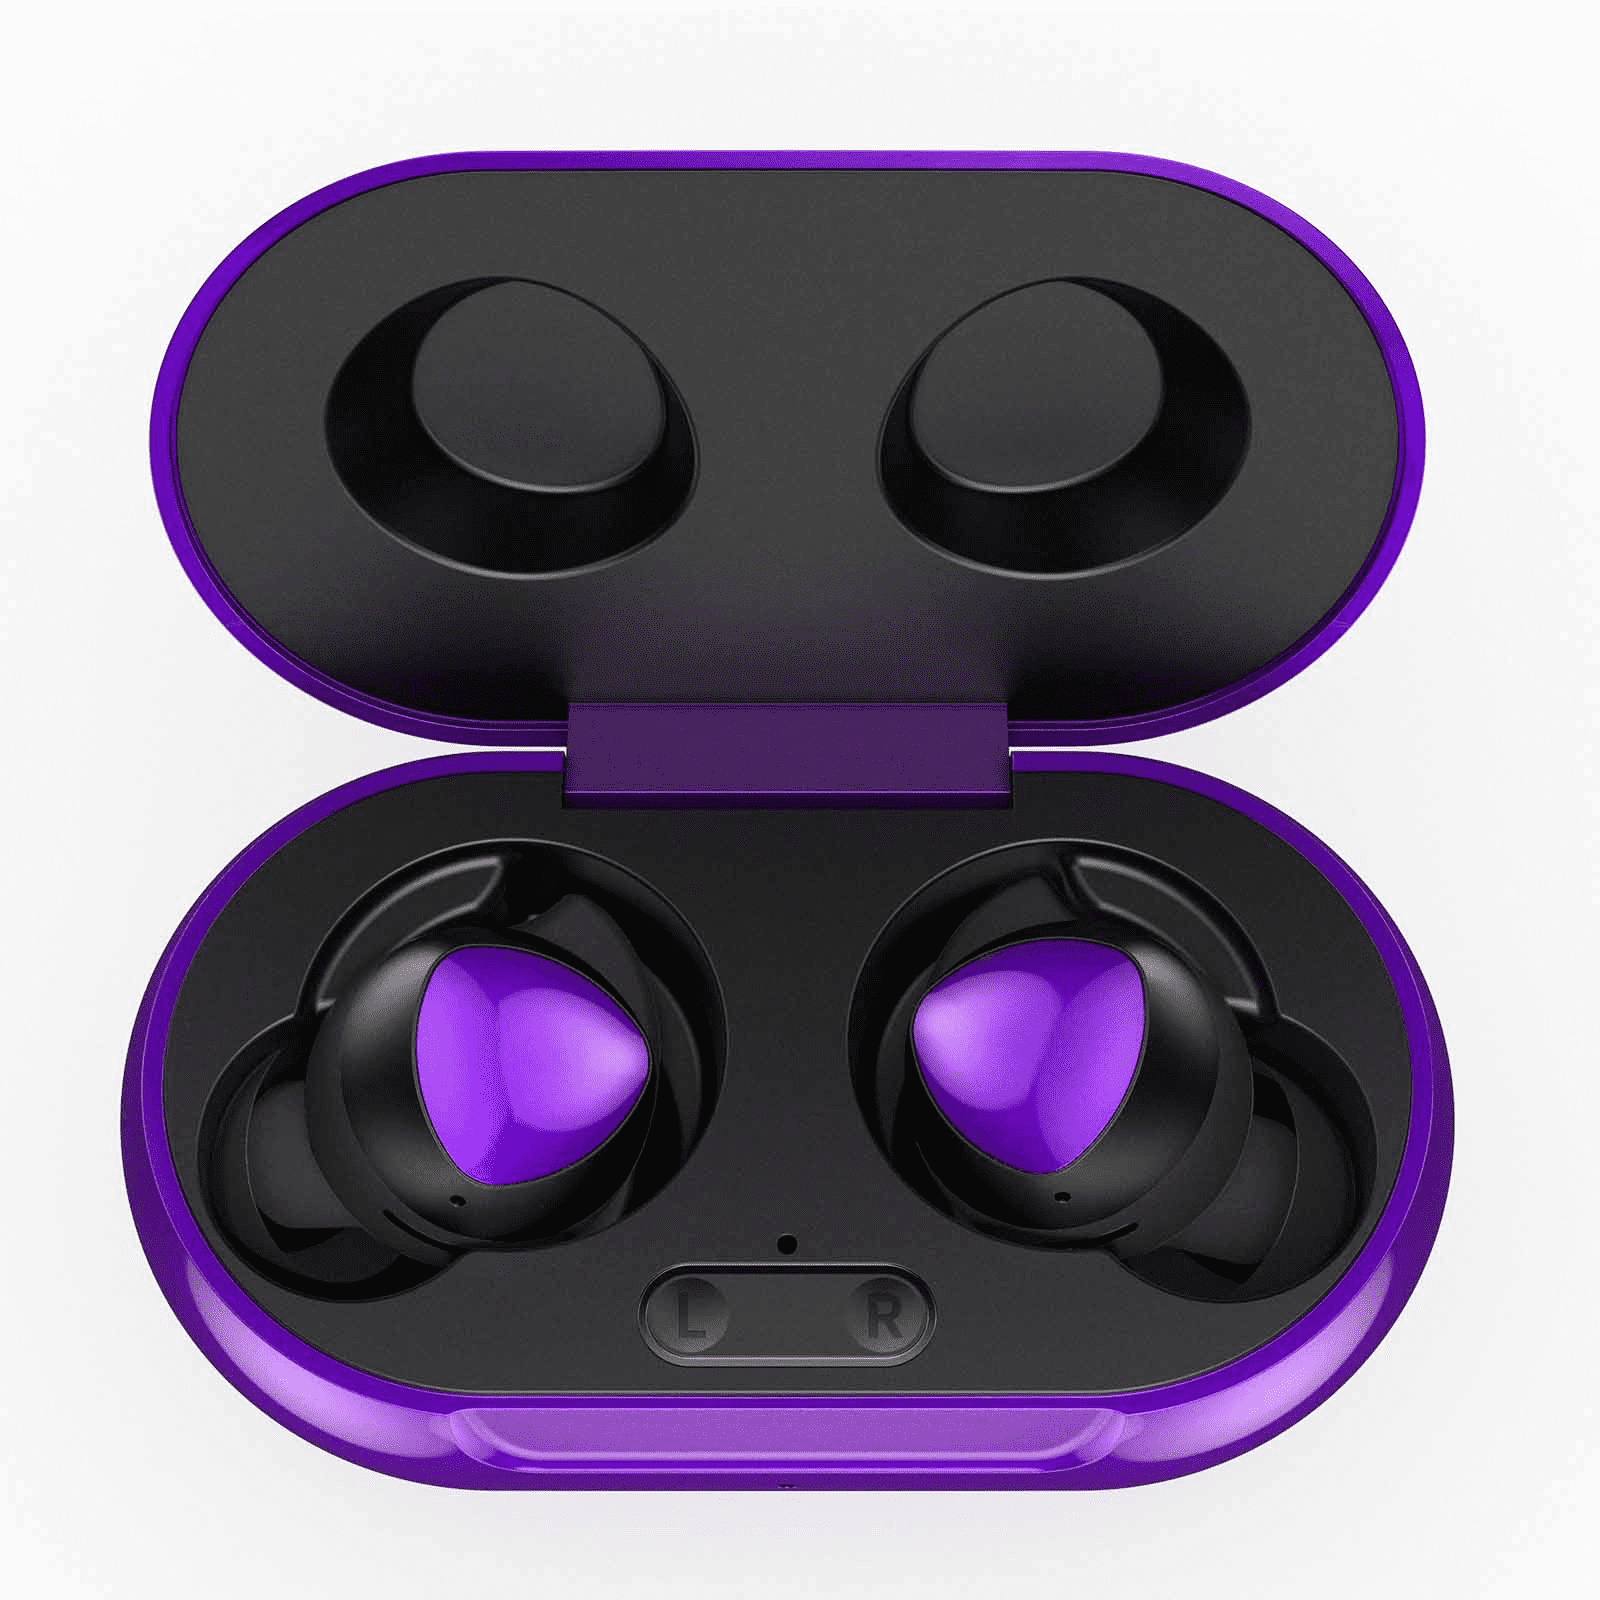 UrbanX Street Buds Plus True Bluetooth Wireless Earbuds For Wiko Feel Lite With Active Noise Cancelling (Charging Case Included) Purple - Walmart.com